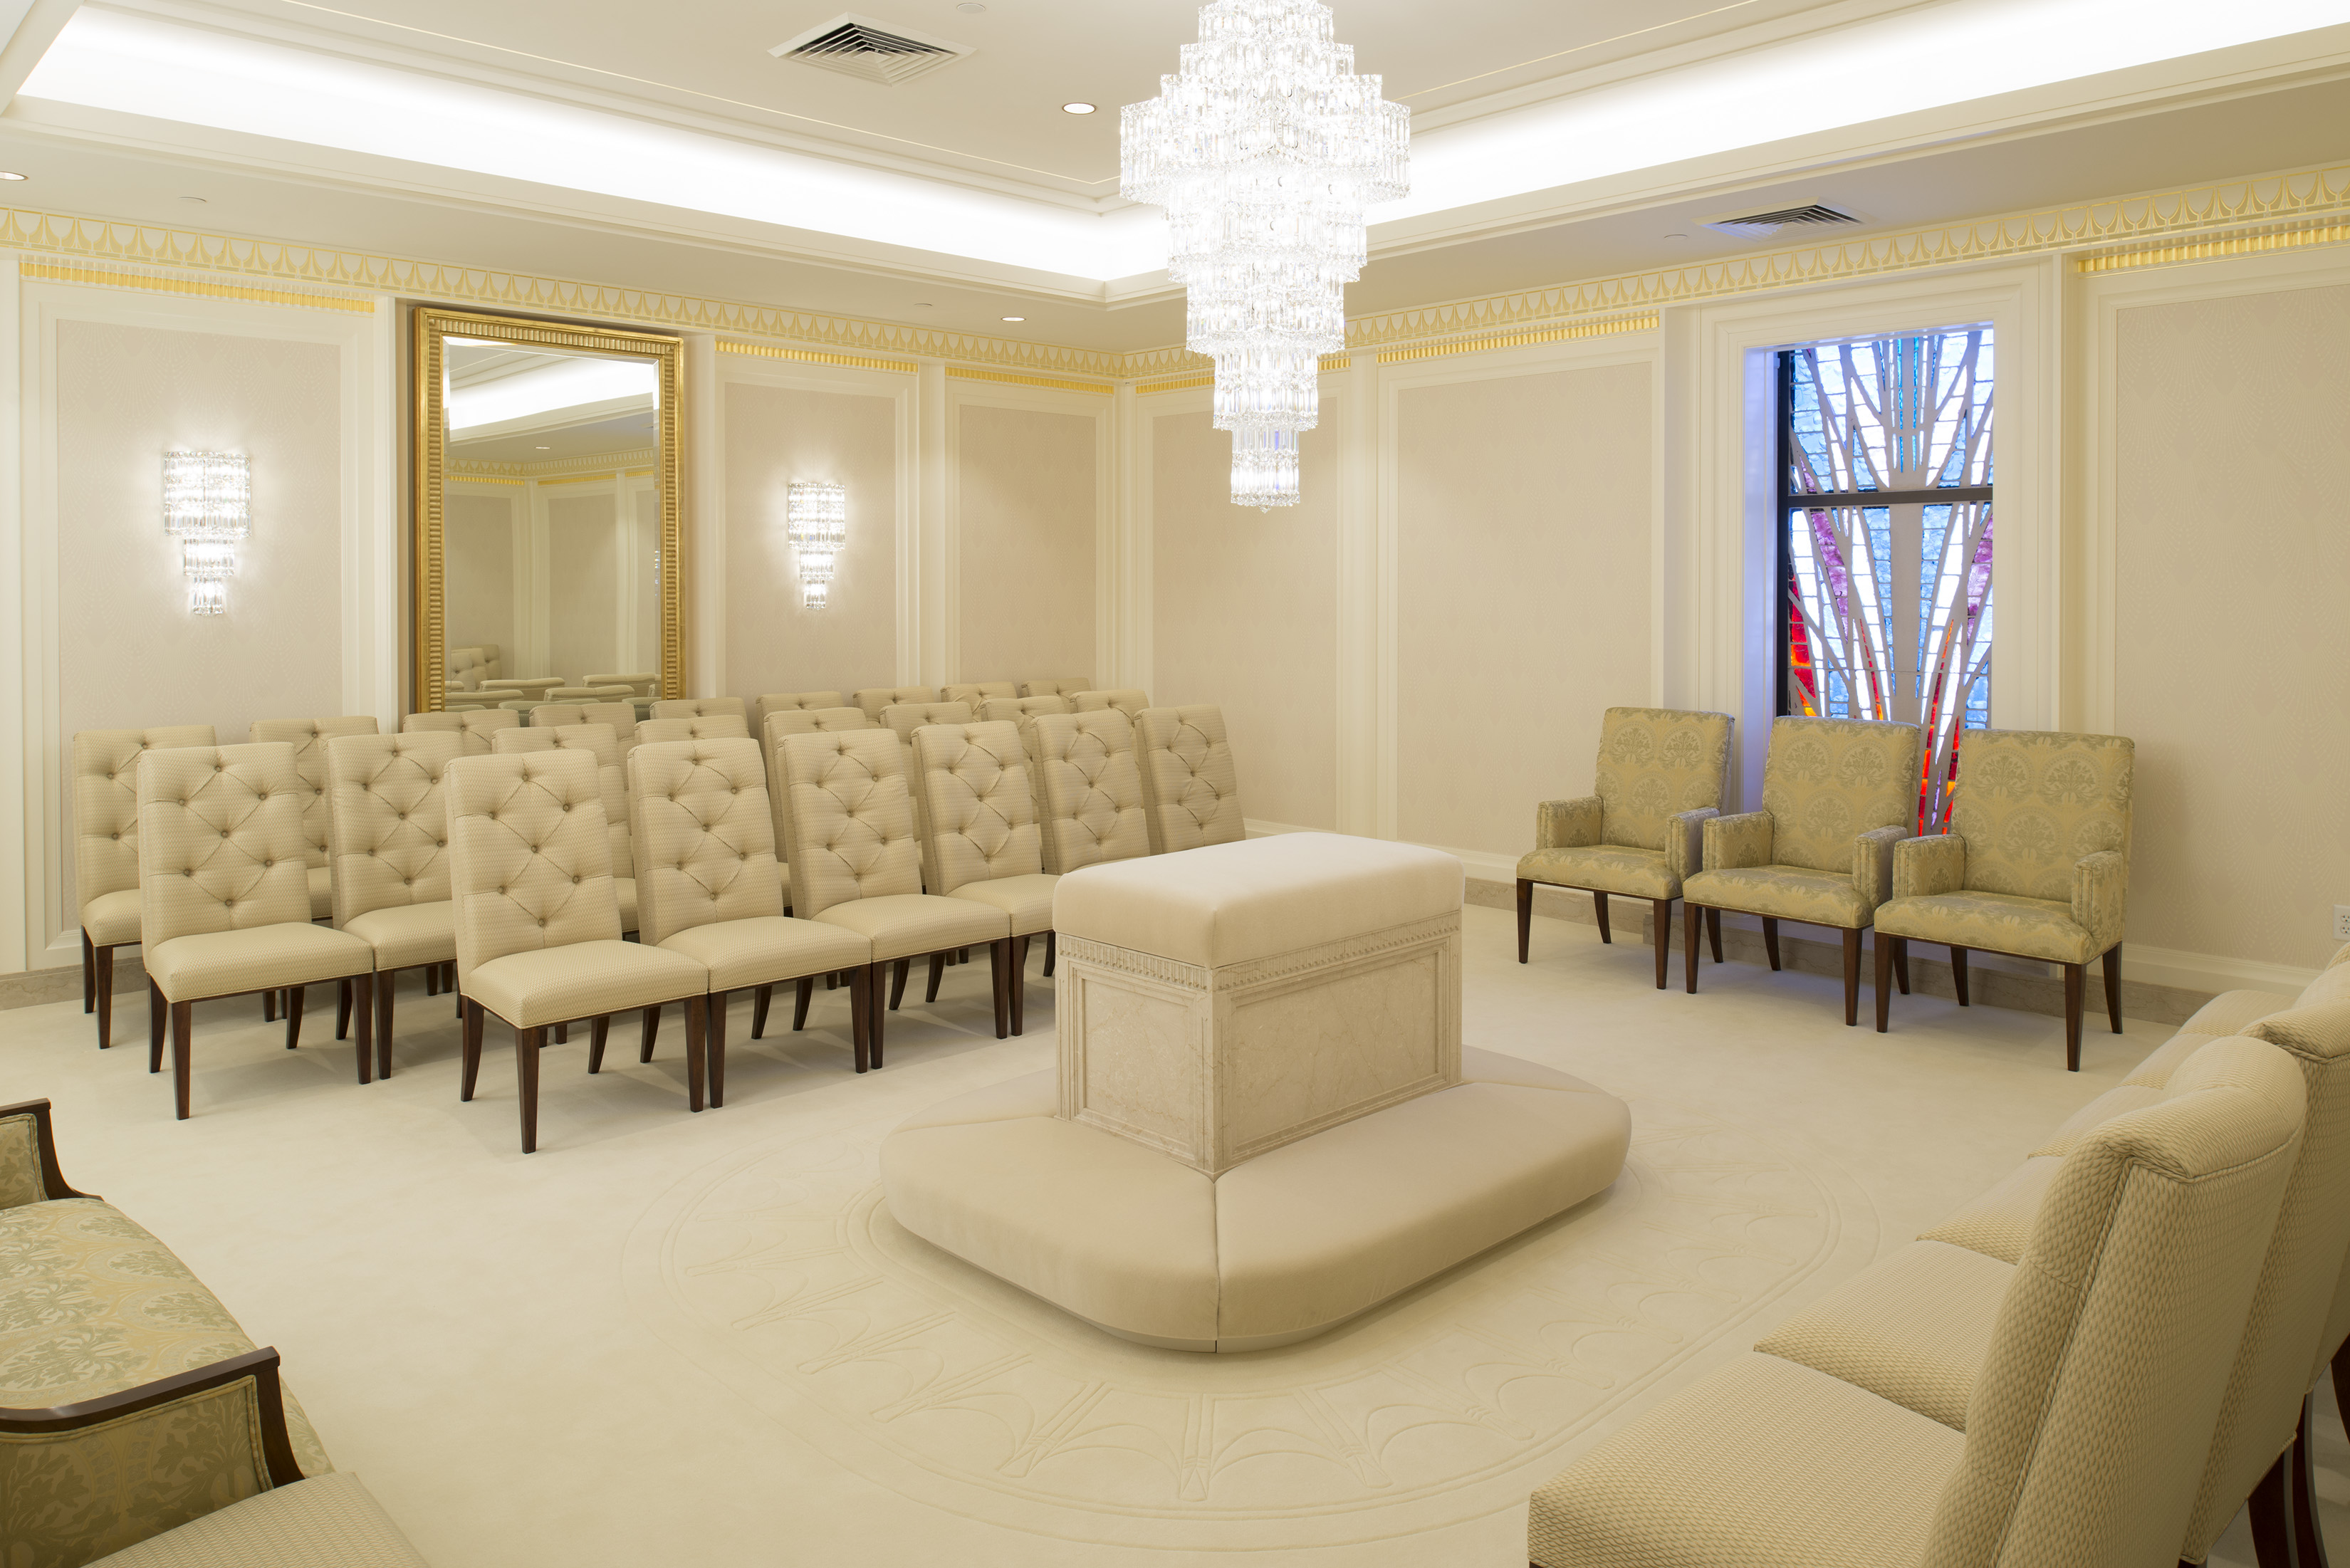 A white room with white chairs lined around the room and a white altar in the center of the room.